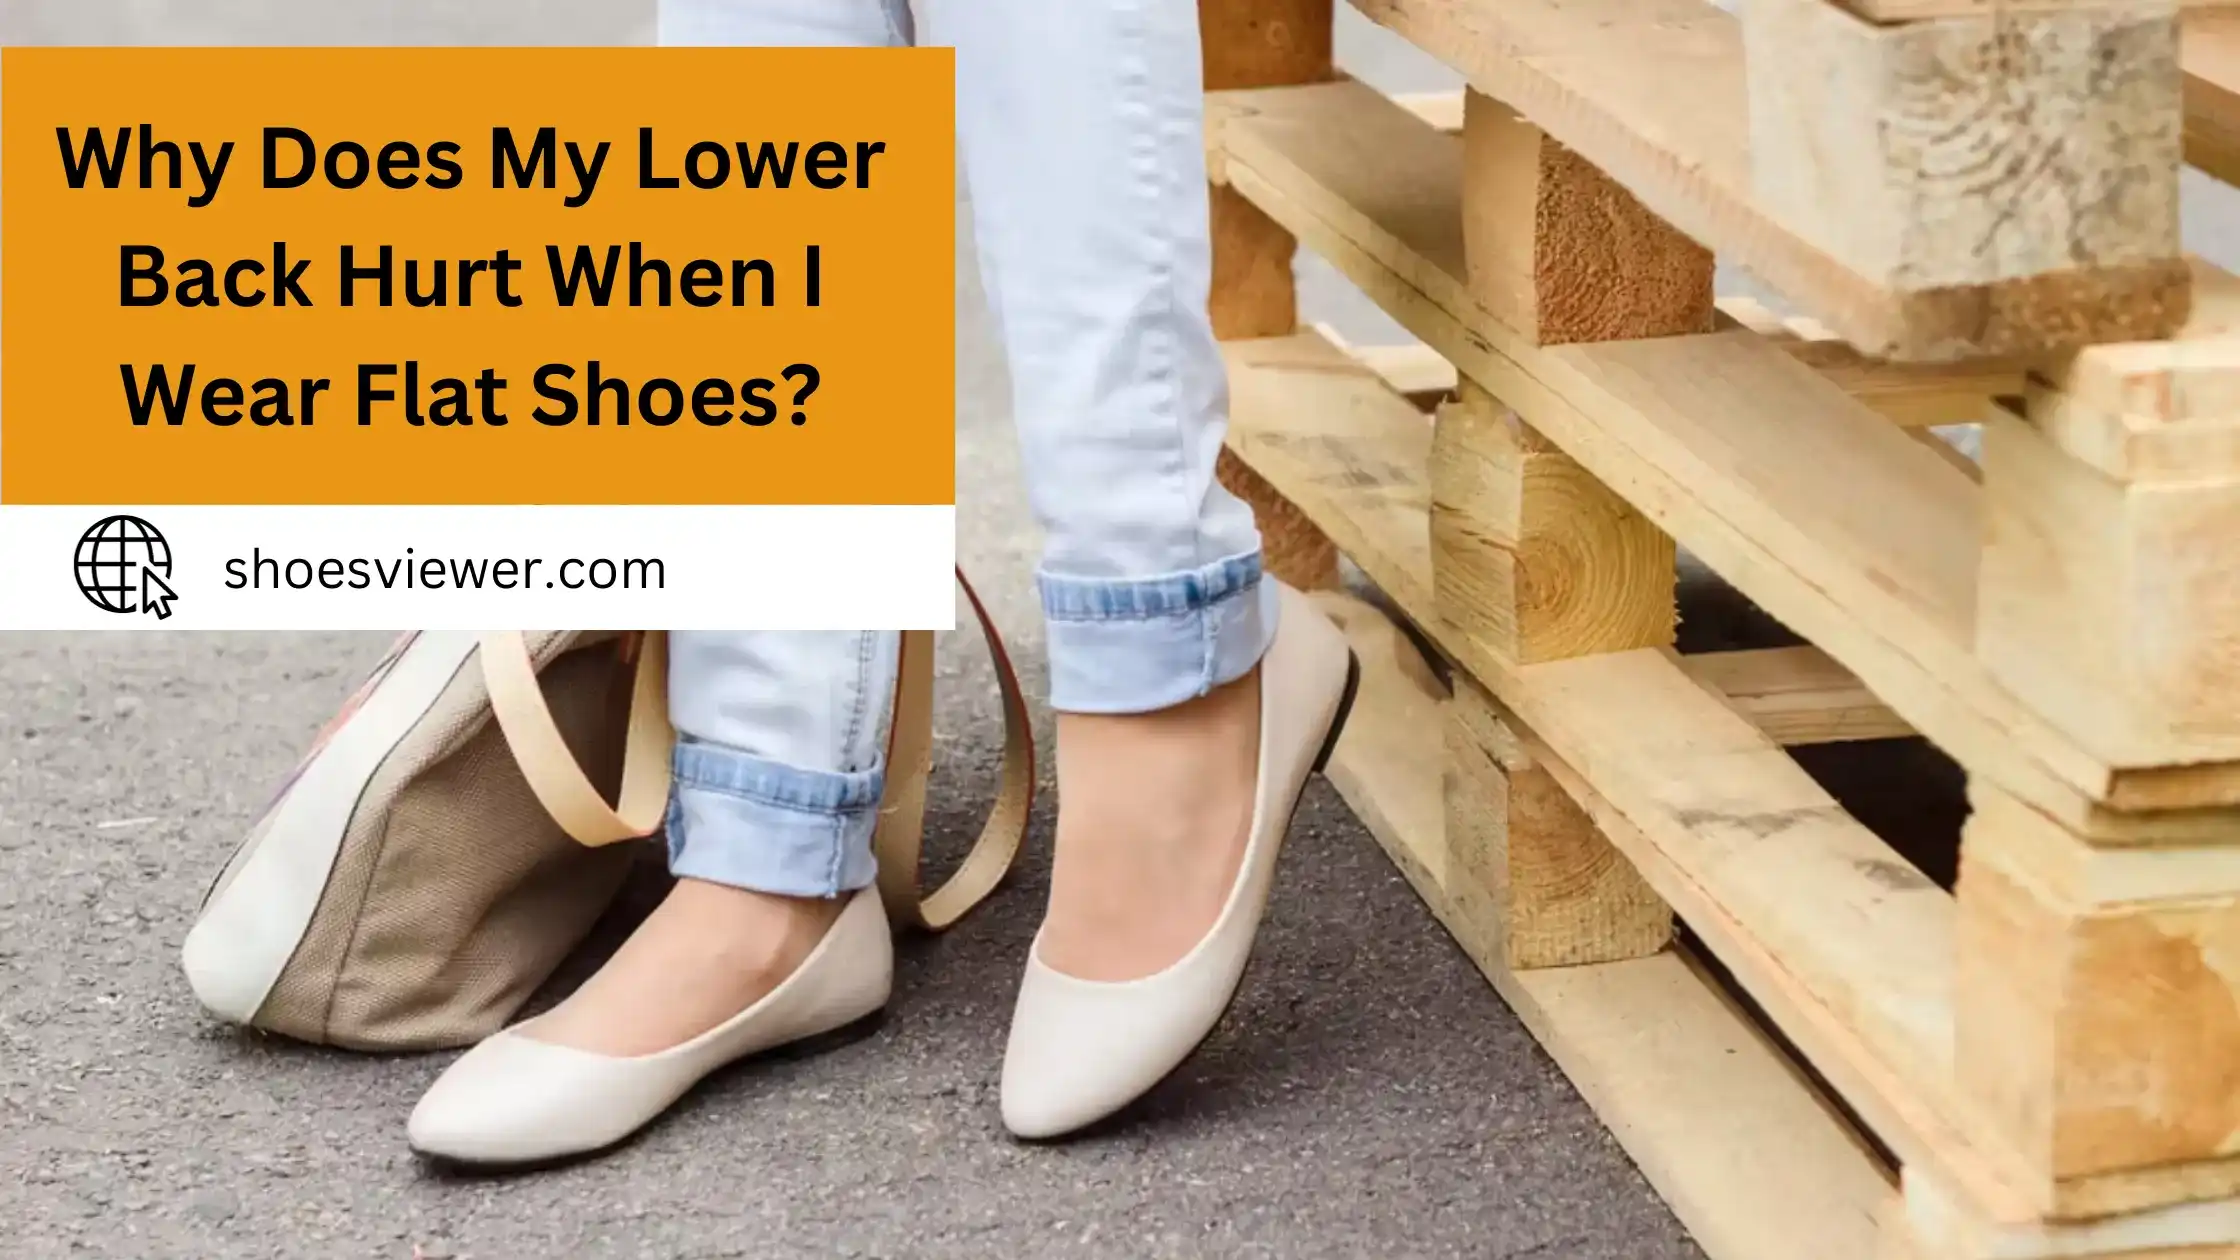 Why Does My Lower Back Hurt When I Wear Flat Shoes?